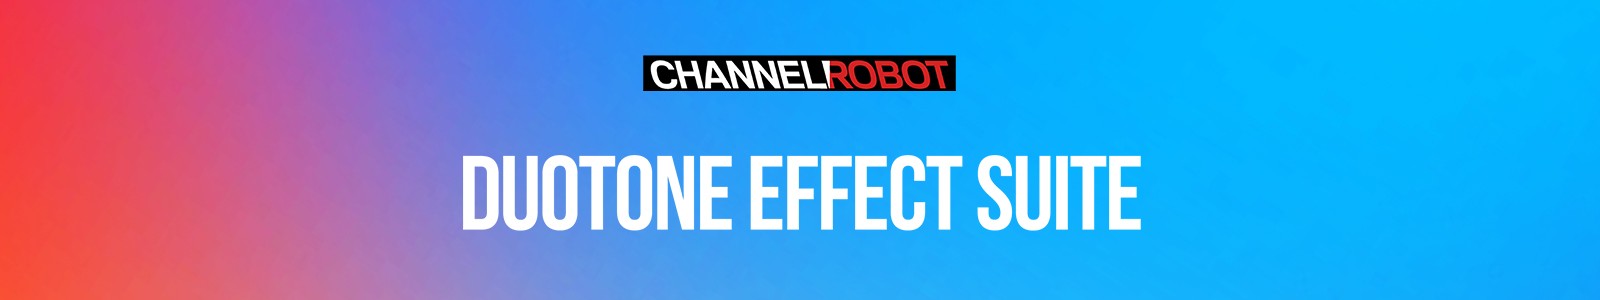 DuoTone Effect Suite by Channel Robot